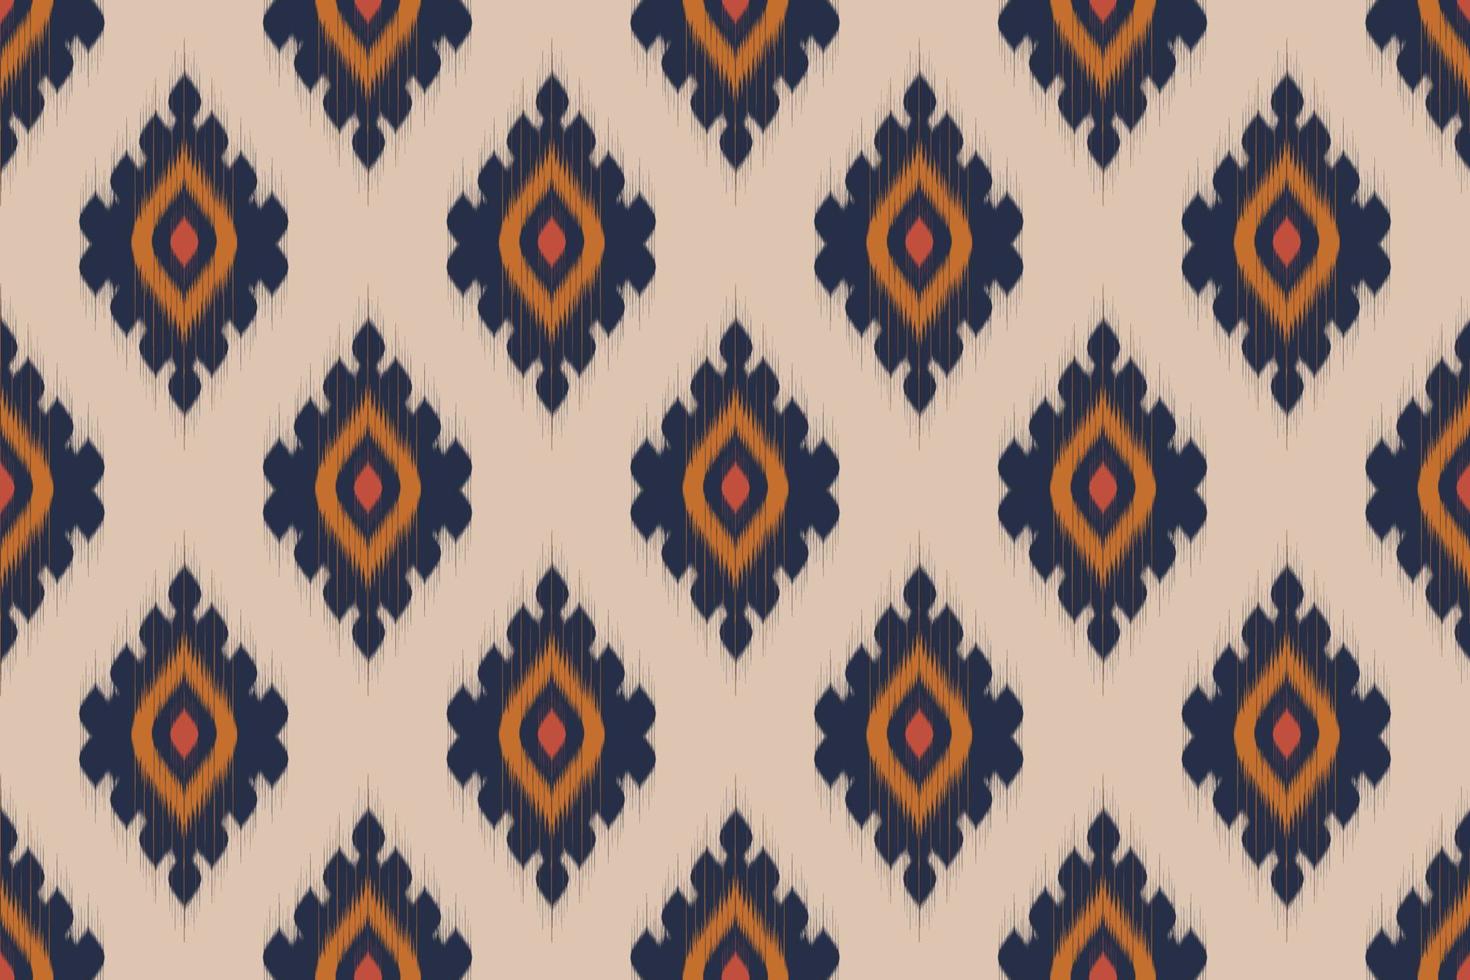 Geometric ethnic oriental ikat seamless pattern traditional. Design for background, wallpaper, vector illustration, fabric, clothing, batik, carpet, embroidery.